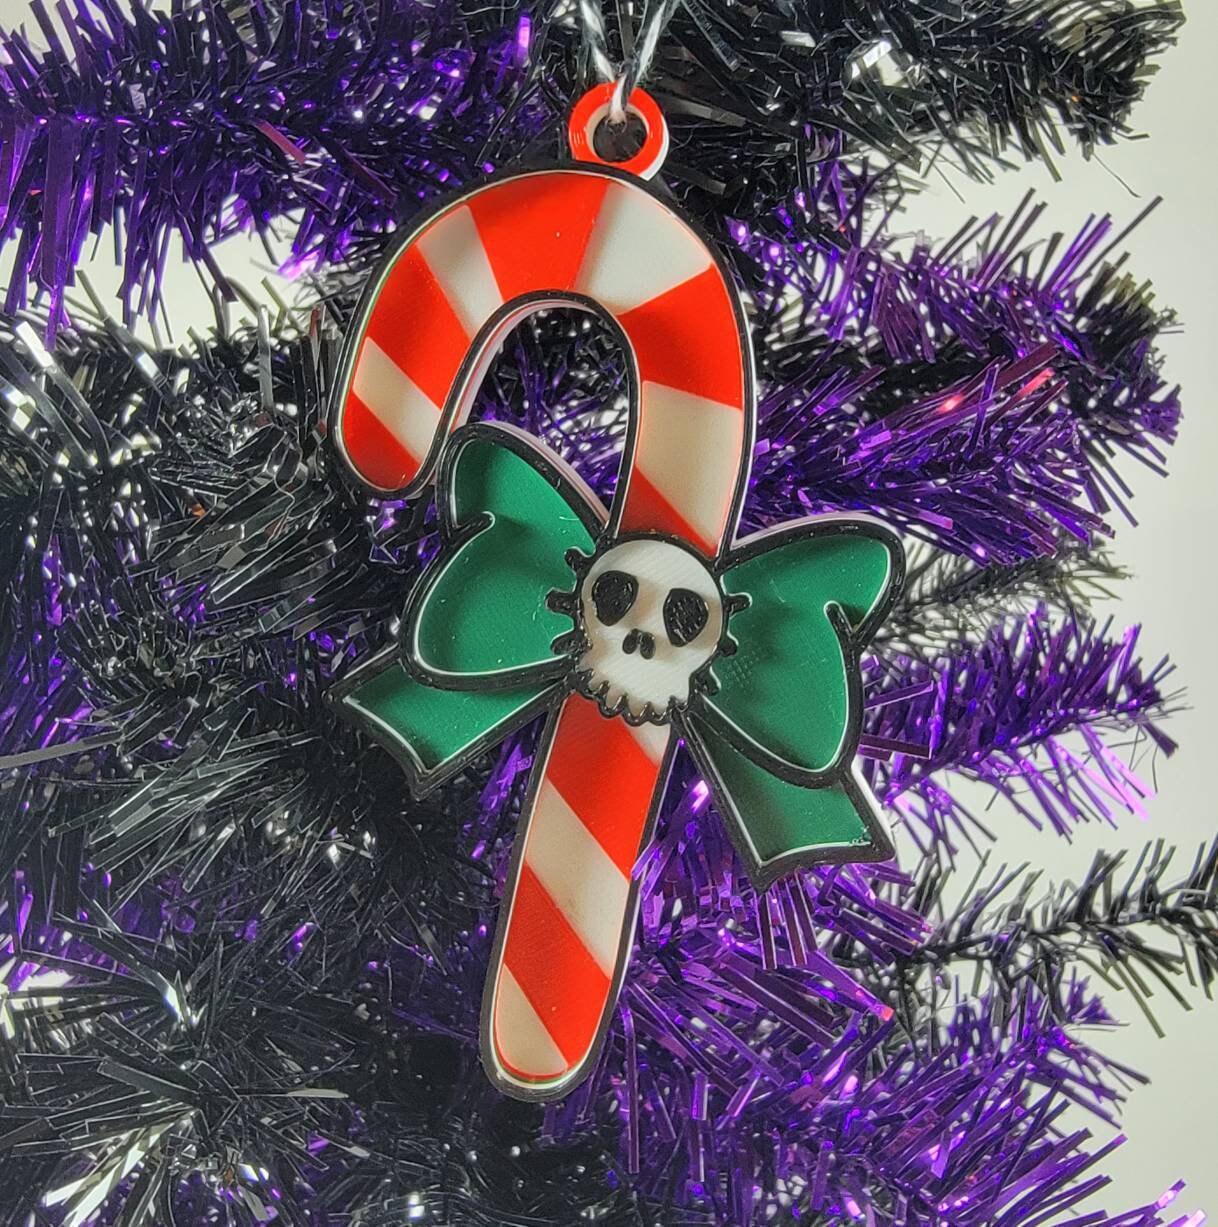 Spooky Candy Cane 3D Printed Christmas Ornament